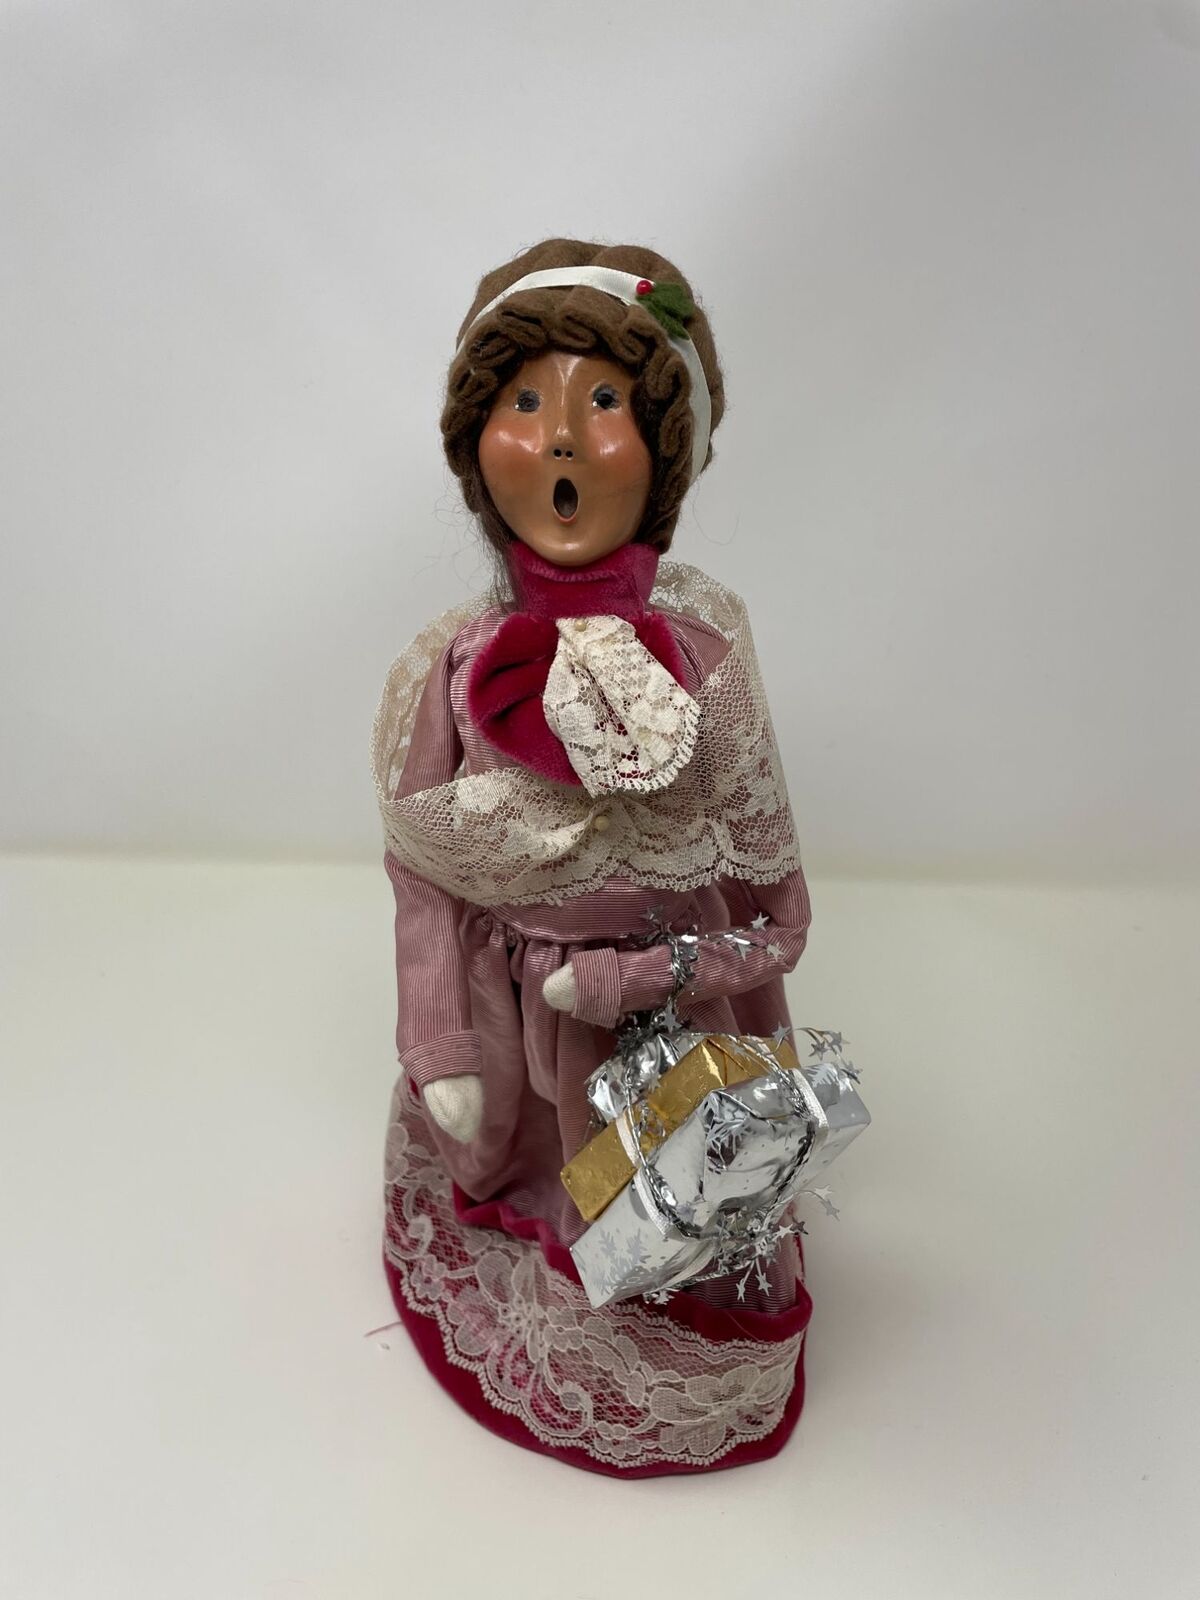 Byers Choice Victorian Shopper Figurine Caroler 2001 Pink Lace Presents Signed